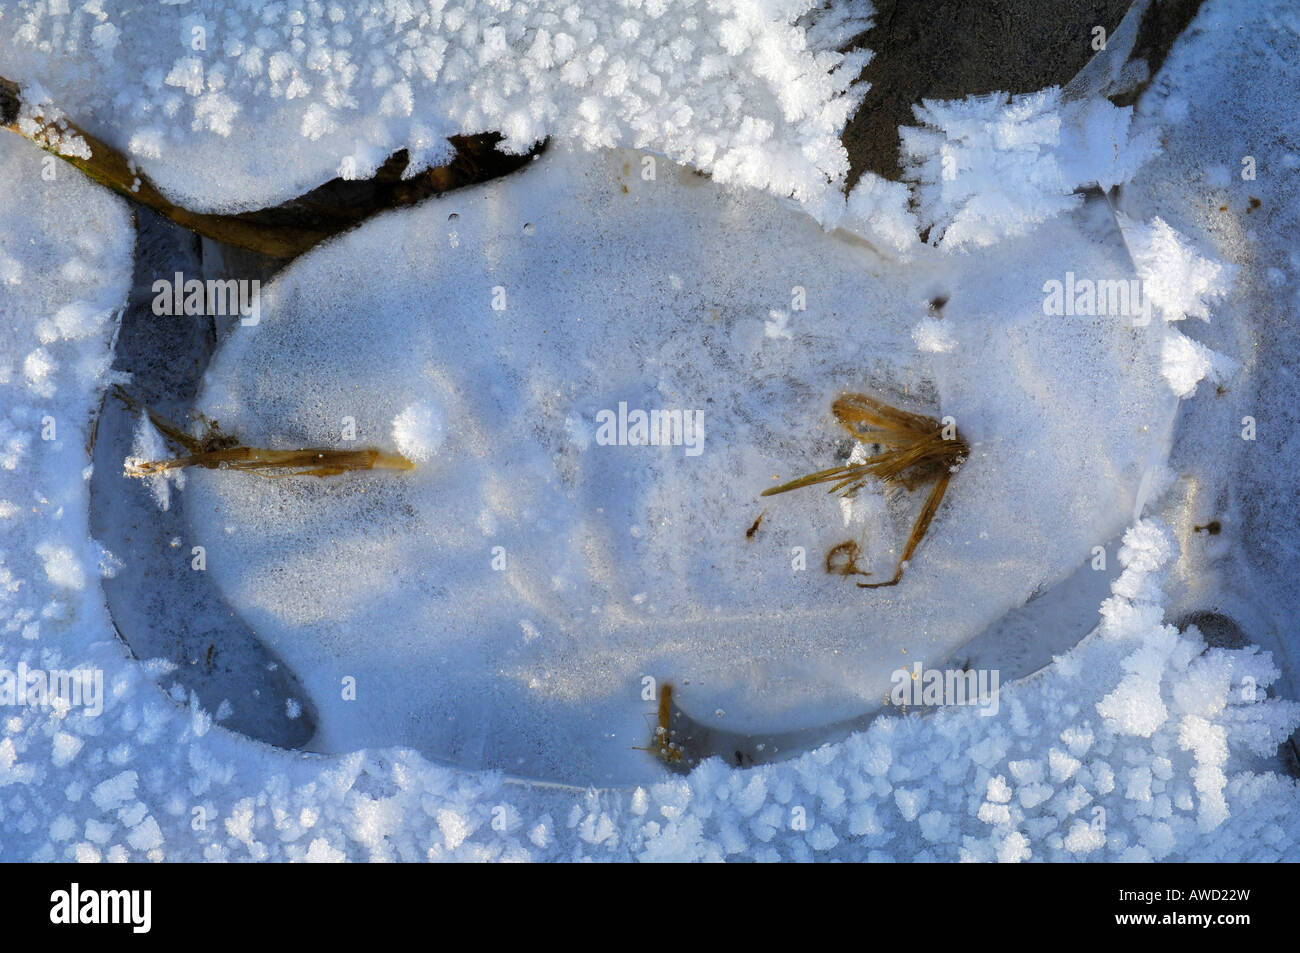 Frozen-over grass in a puddle with ice crystals, Schwaebische Alp, Baden-Wuerttemberg, Germany, Europe Stock Photo